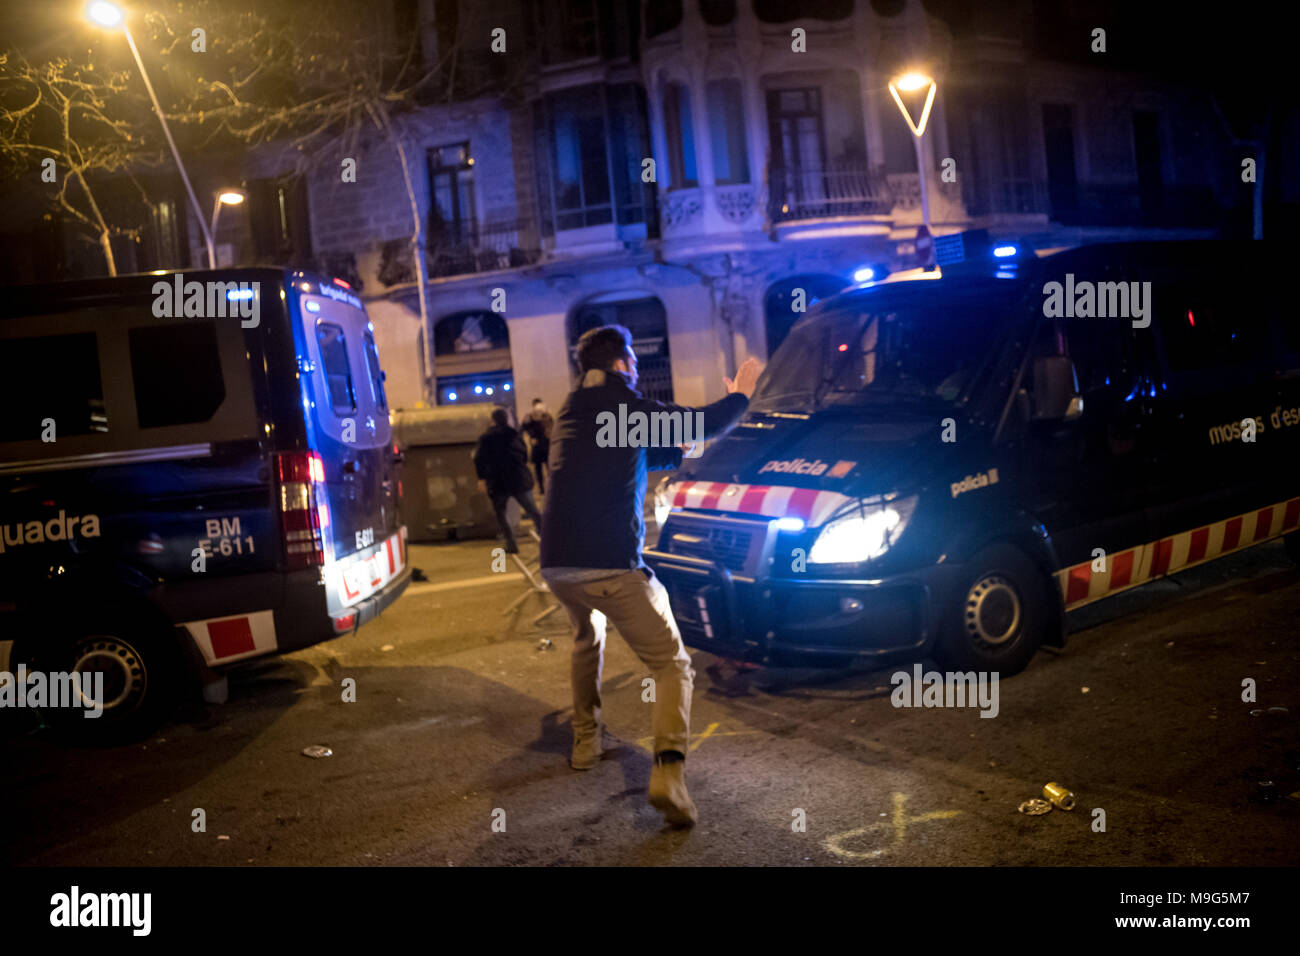 Barcelona, Catalonia, Spain. 25th Mar, 2018. A riot police van is about to run over a demonstrator in Barcelona. Protests erupted on the street of Barcelona after deposed Catalan president Carles Puigdemont was arrested by German police on an international warrant. Credit: Jordi Boixareu/ZUMA Wire/Alamy Live News Stock Photo